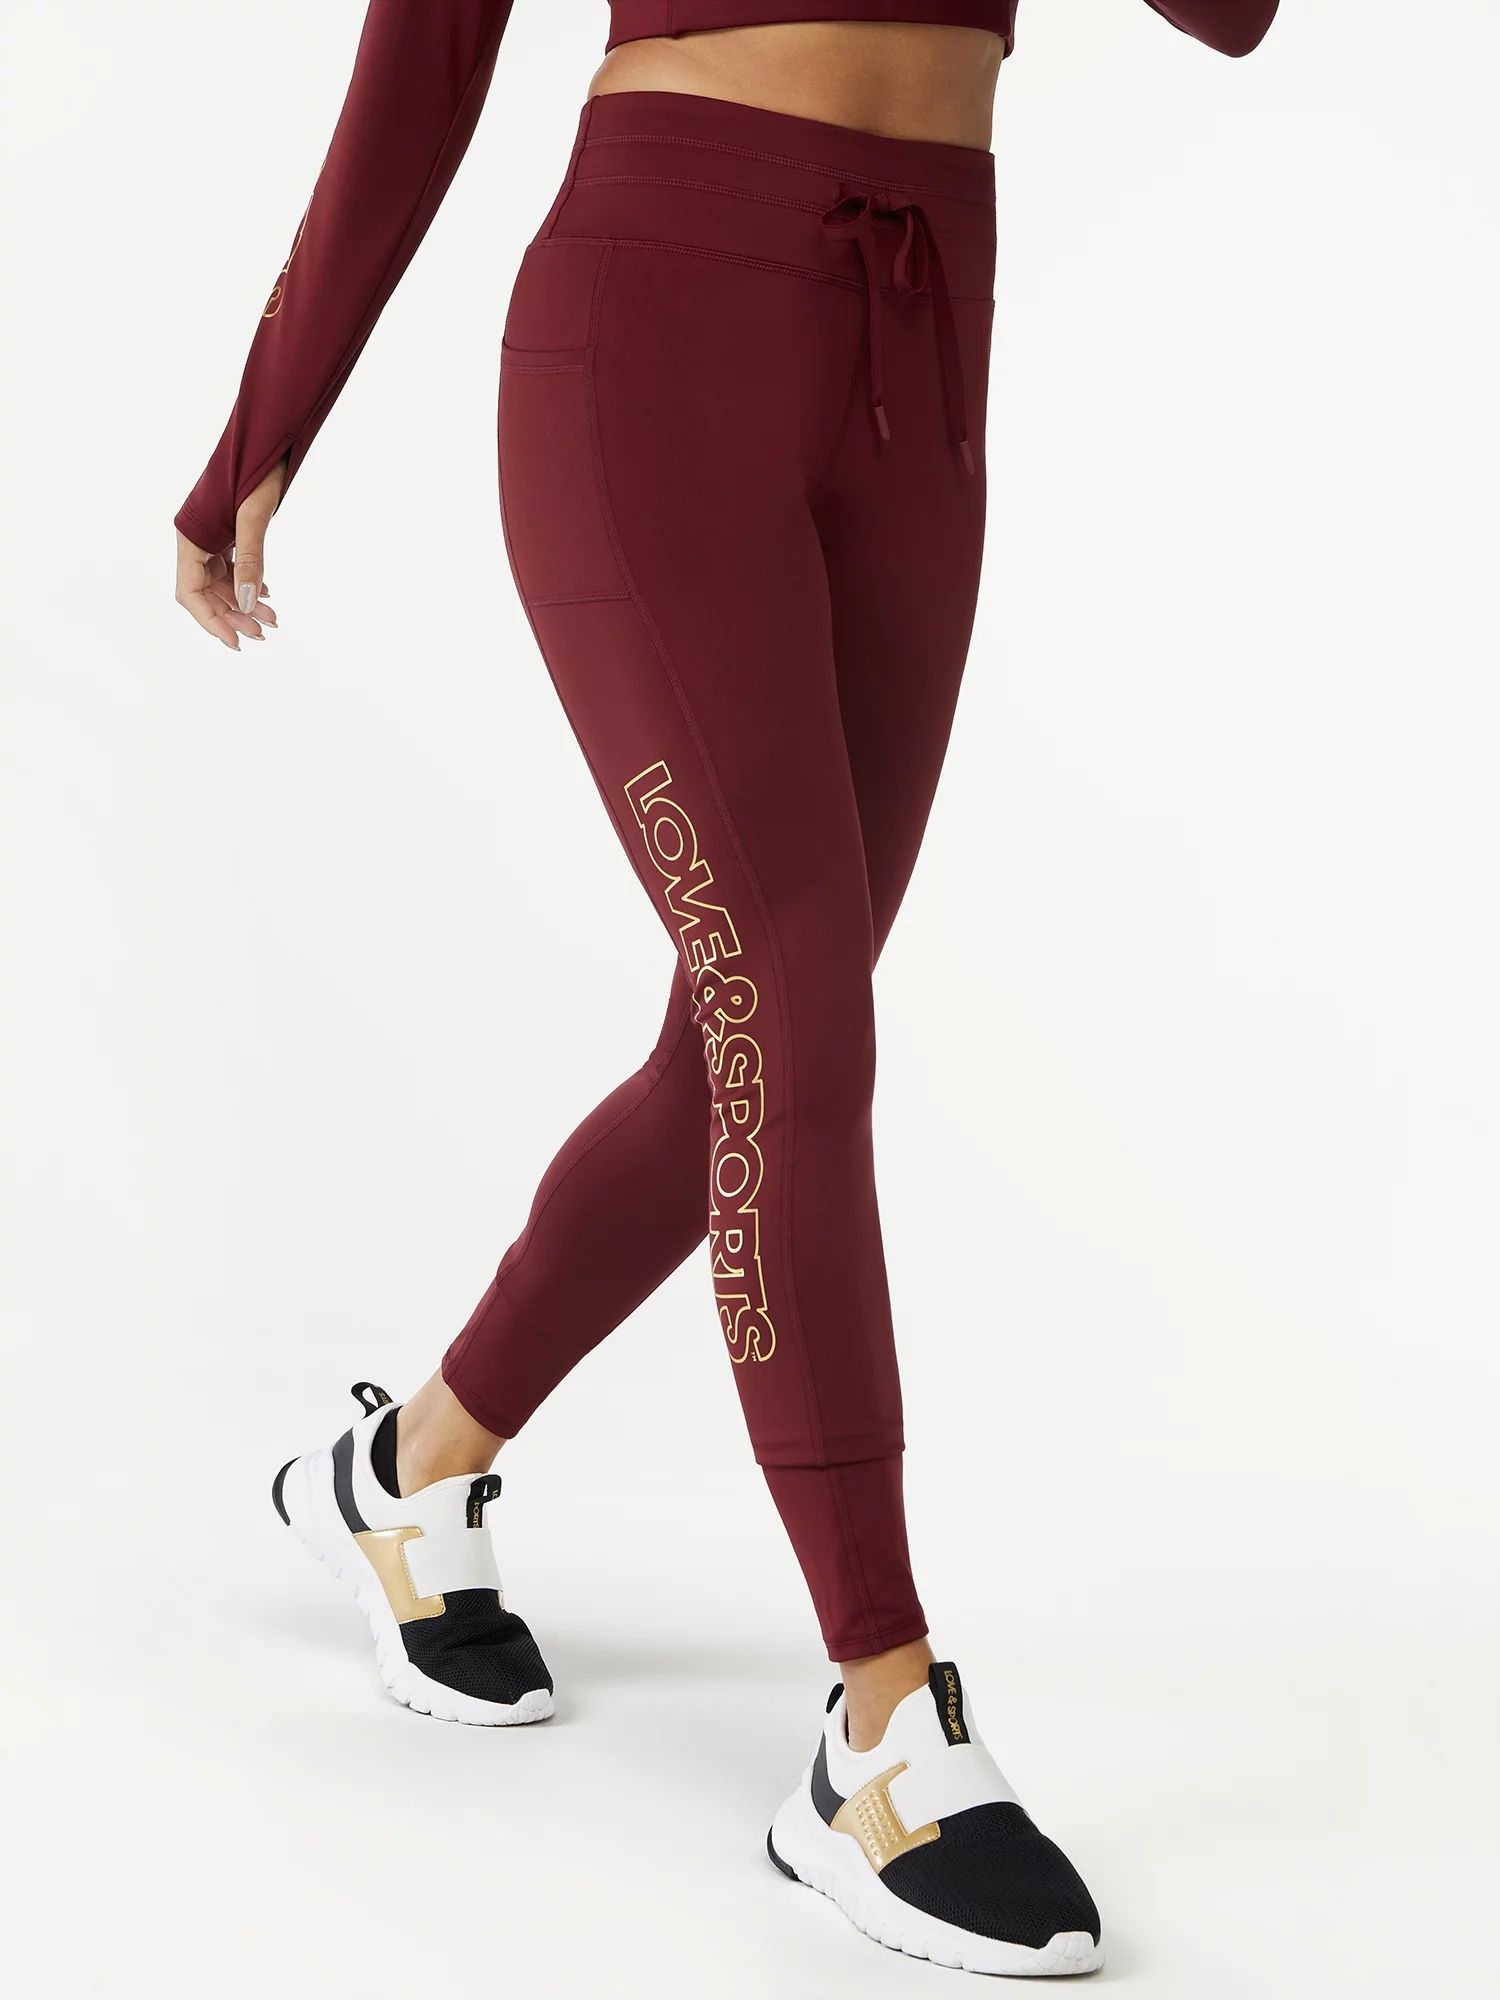 Love & Sports Women's Fitness Tights with Pocket | Walmart (US)